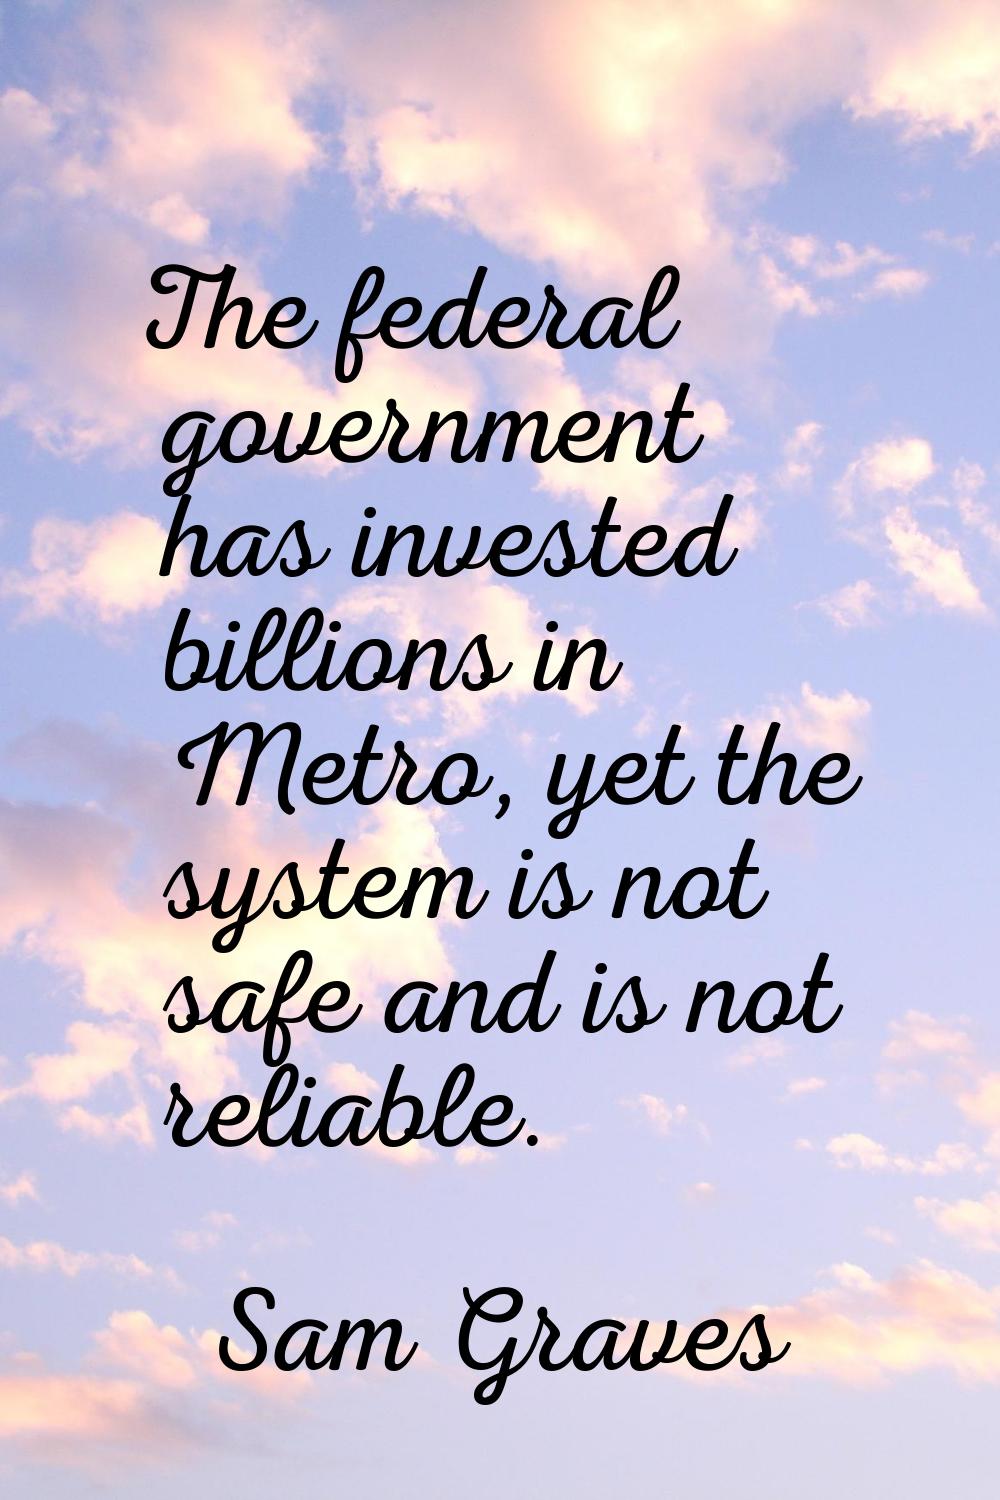 The federal government has invested billions in Metro, yet the system is not safe and is not reliab